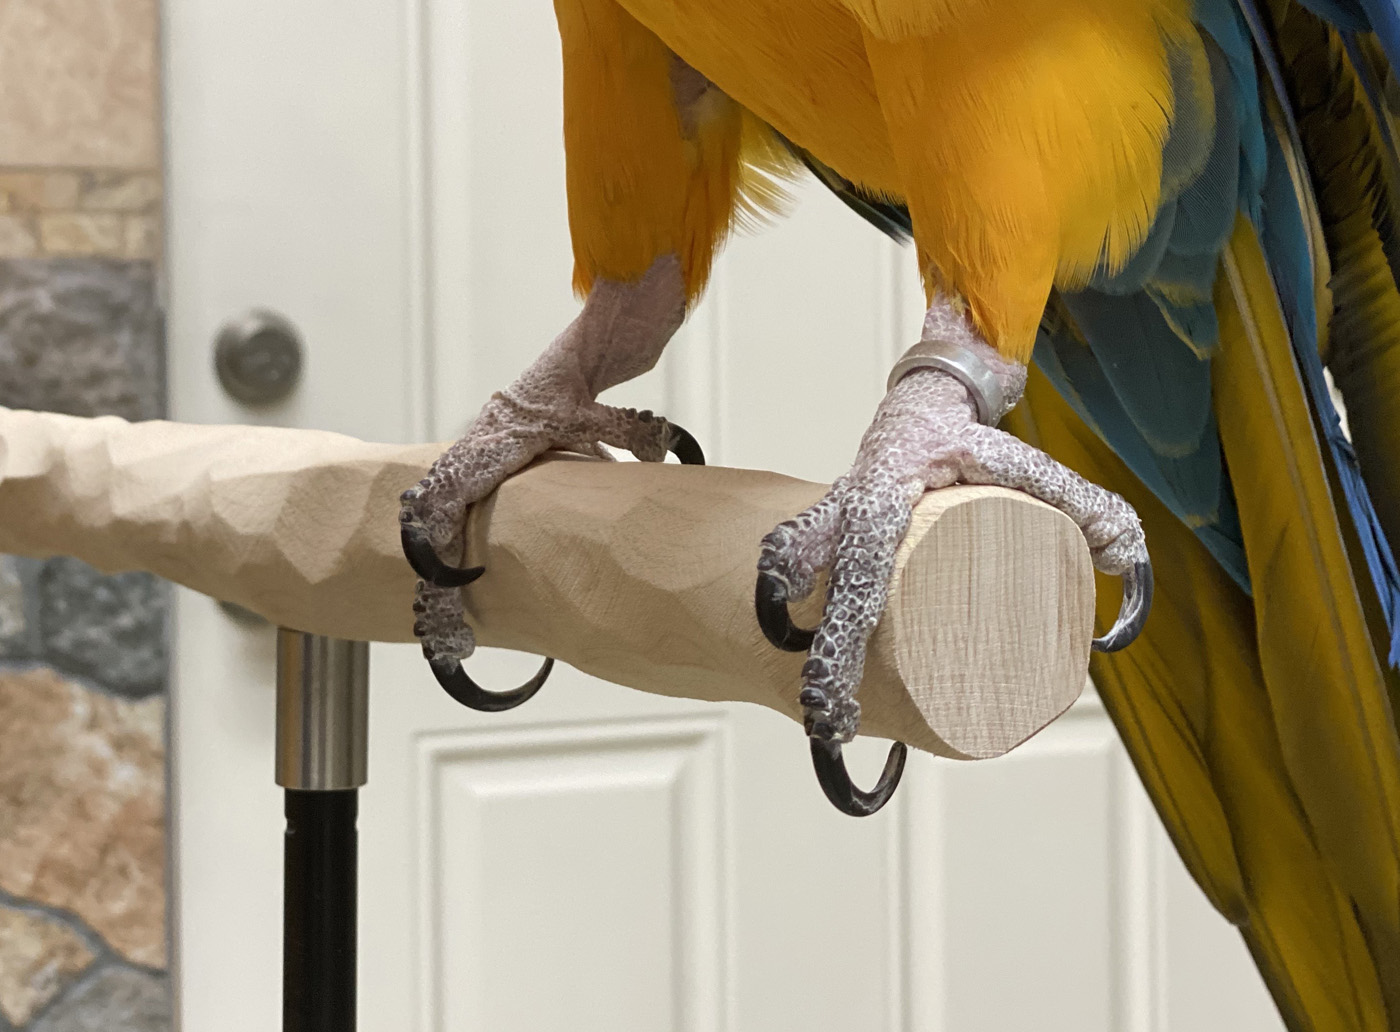 Photo of excessively long parrot nails also known as claws or talons